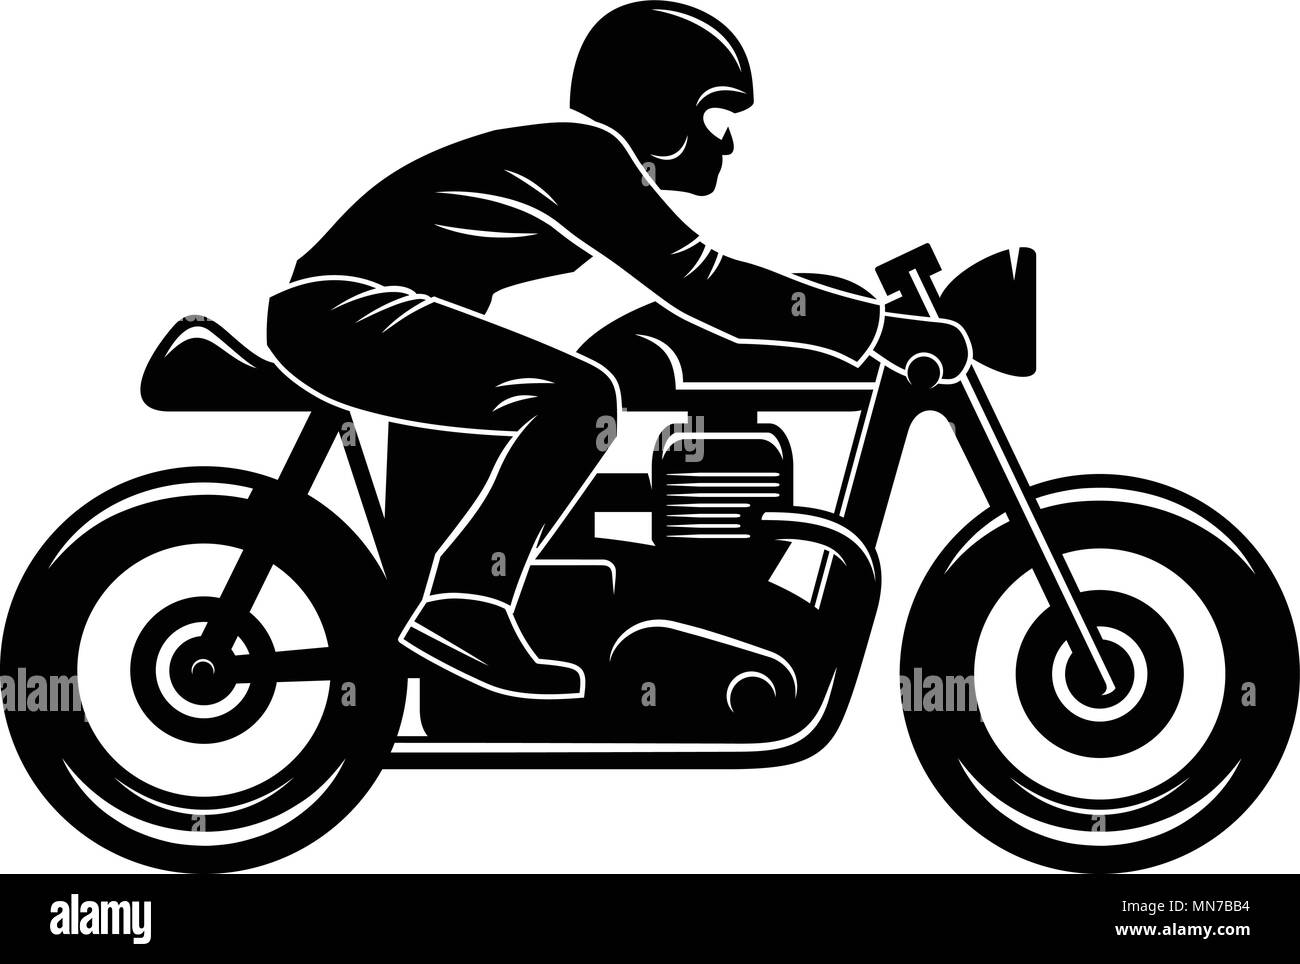 Cafe Racer silhouette isolated on white / Motorcycle rider / Vintage t-shirt graphic design / Tee graphics Stock Vector